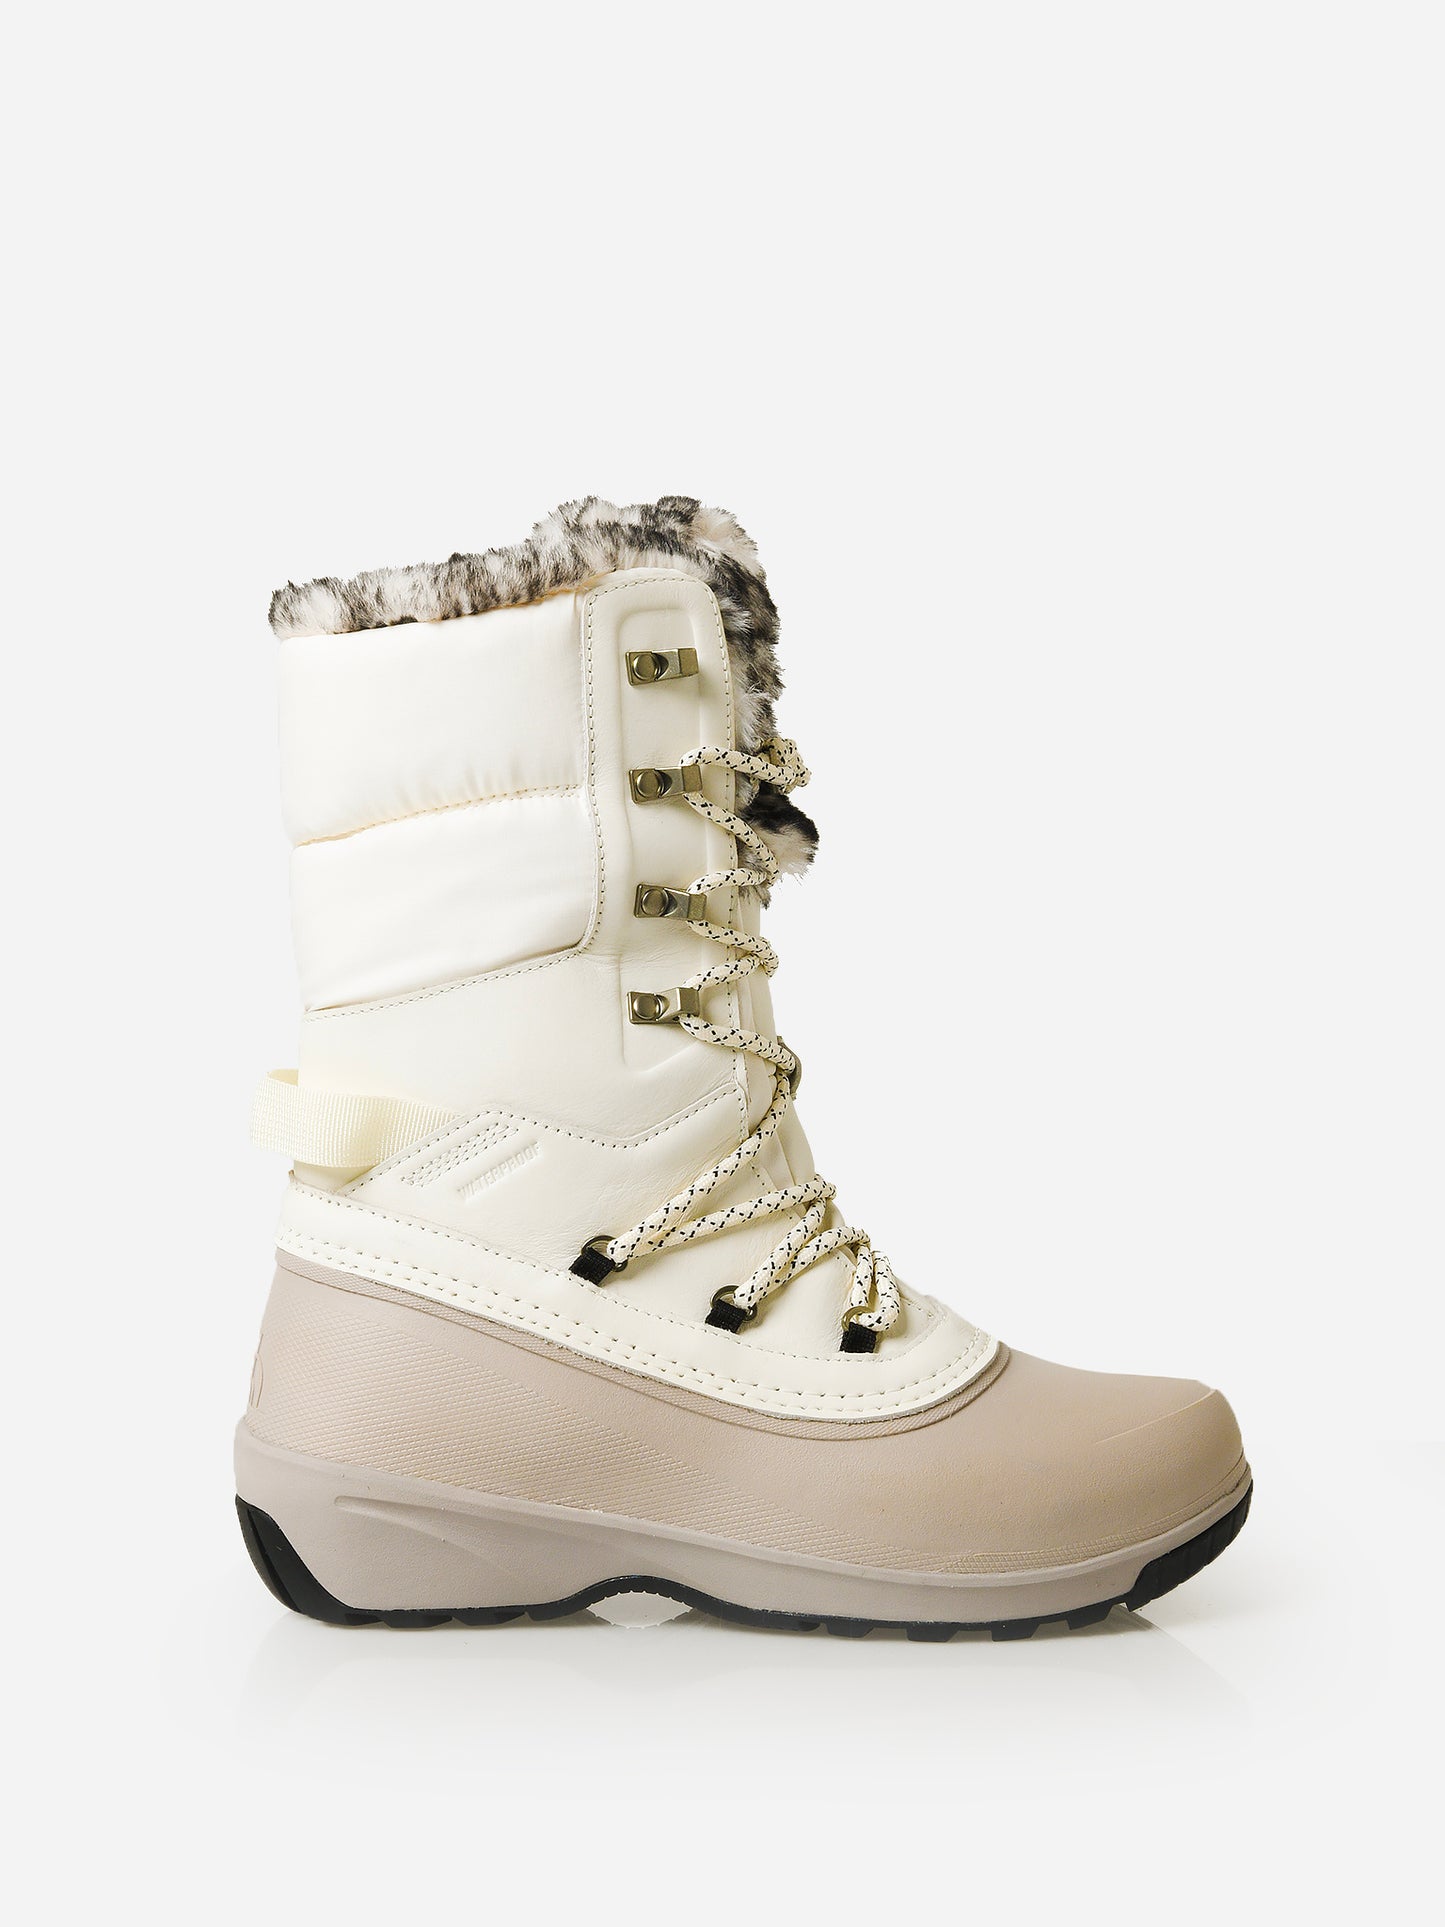 The North Face Women’s Shellista IV Luxe Waterproof Boot